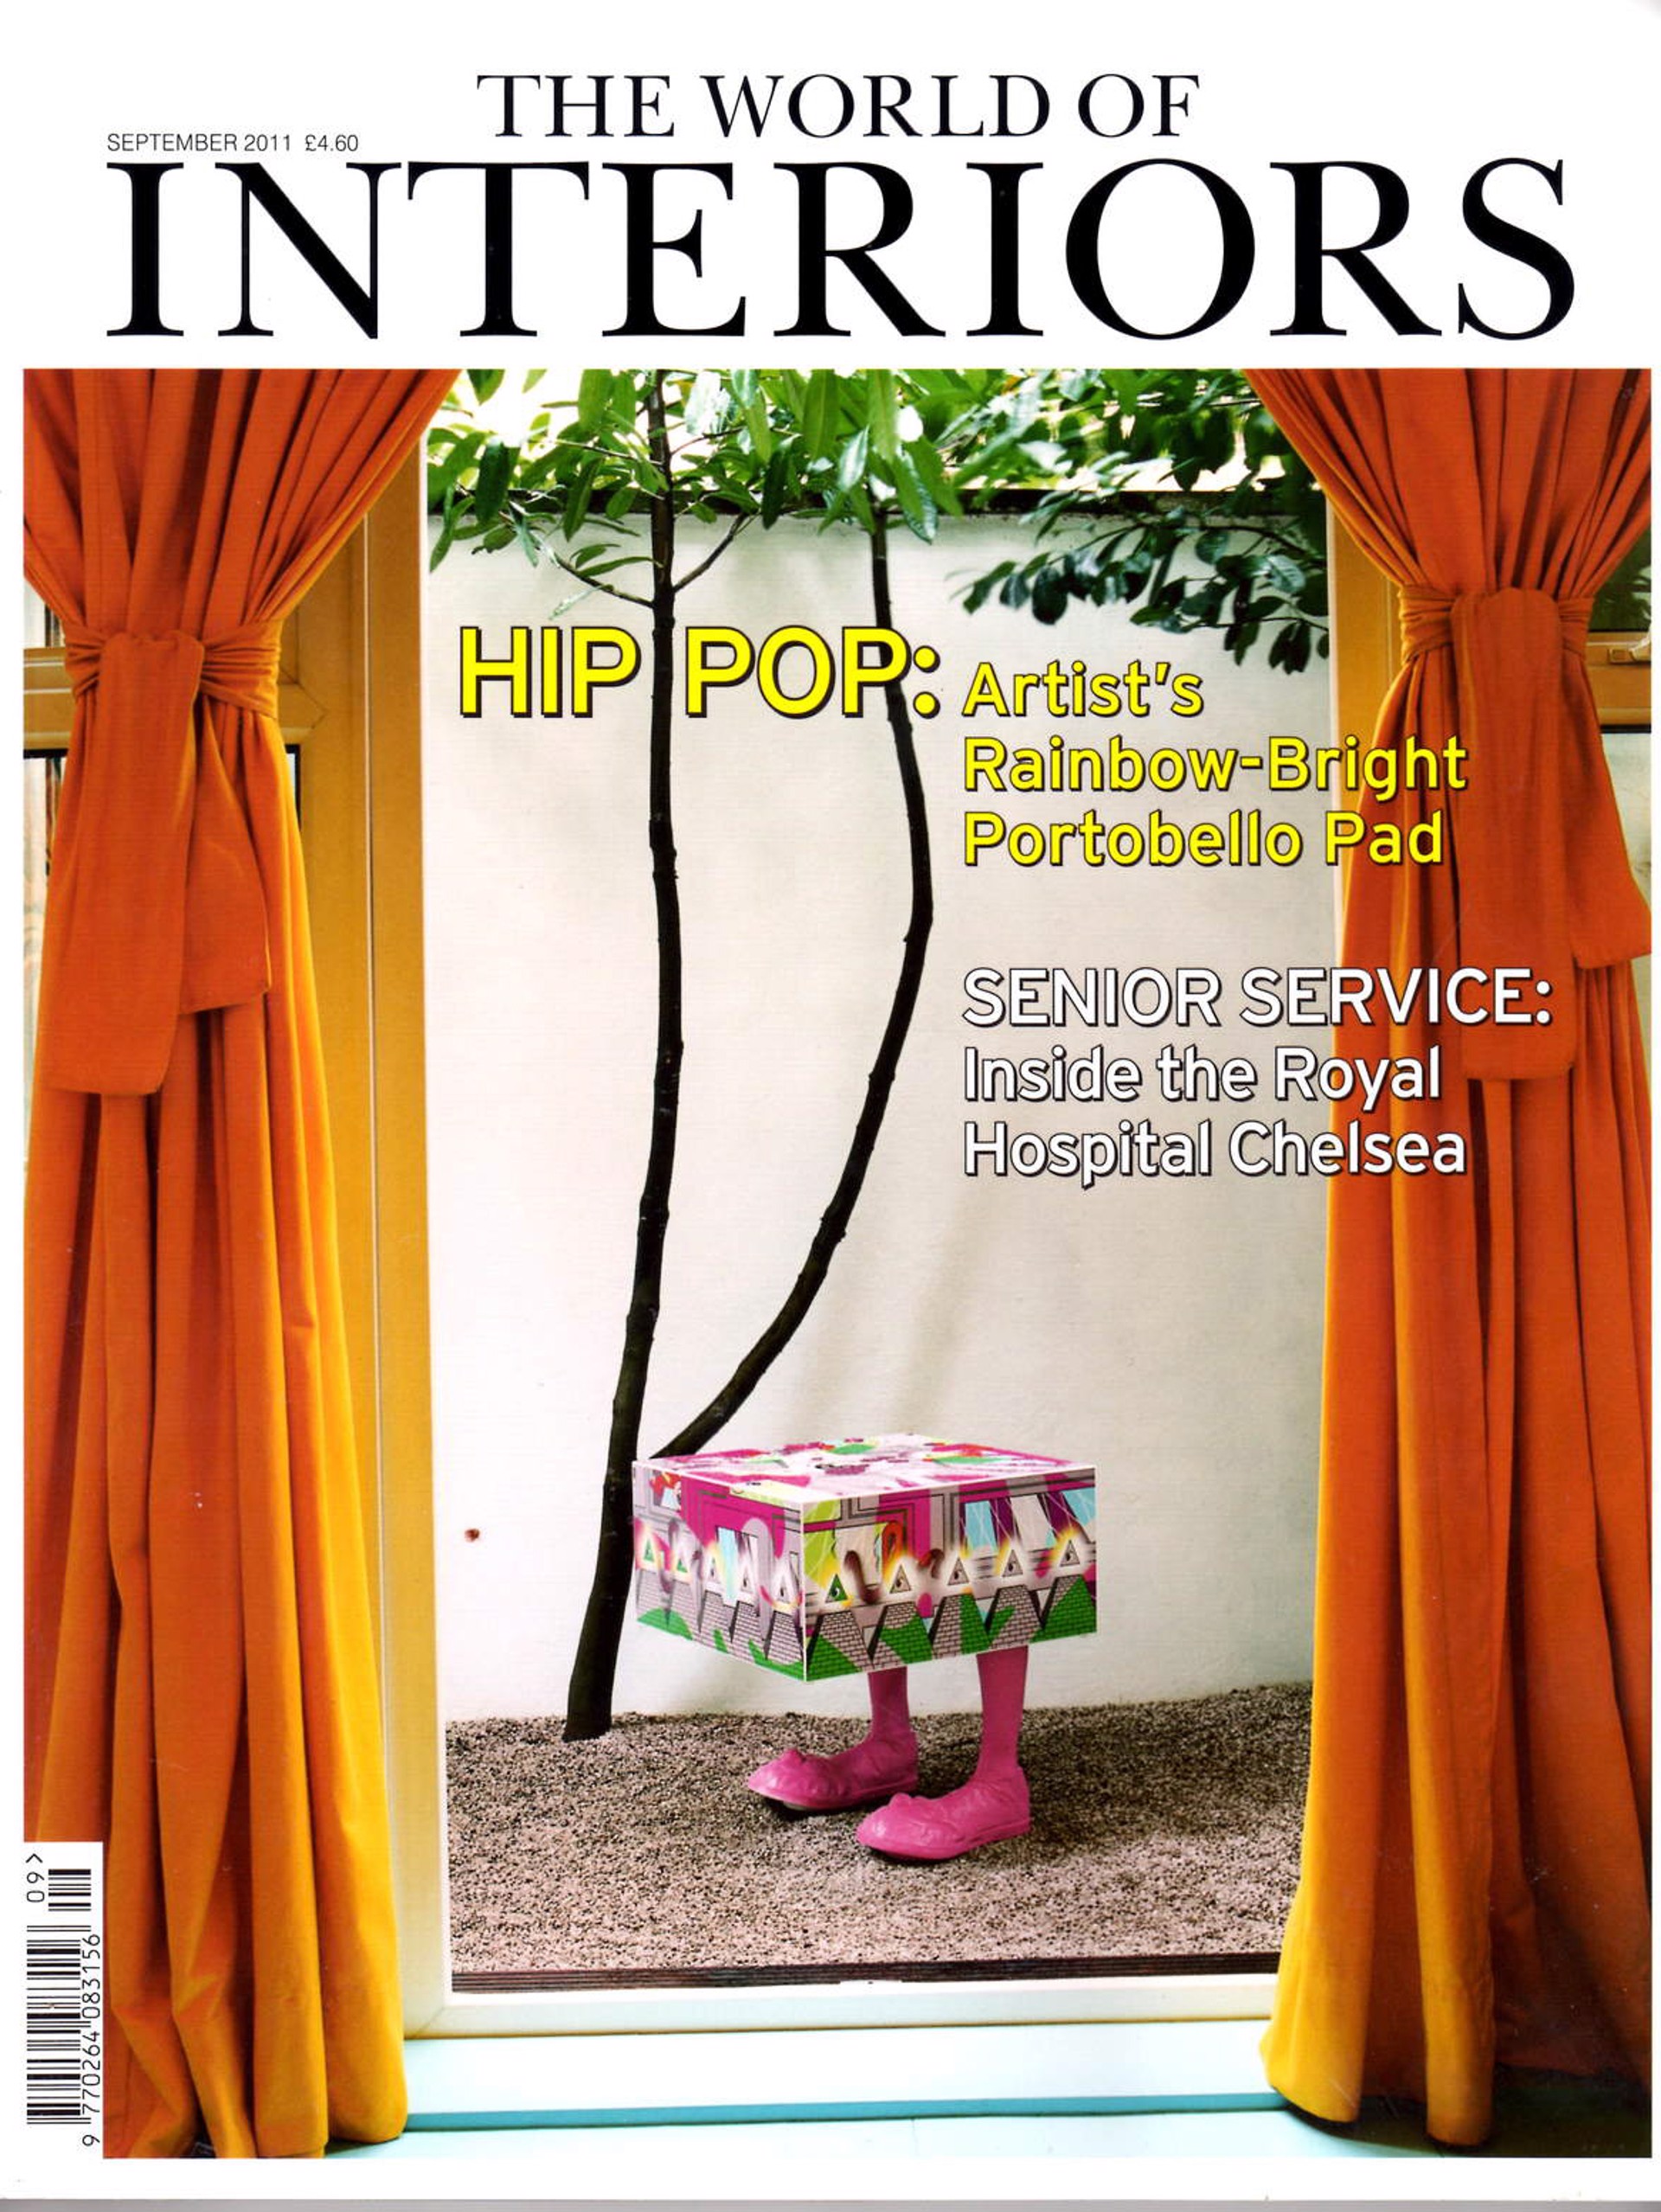 The World of Interiors, September 2011 - Jacques Jarrige